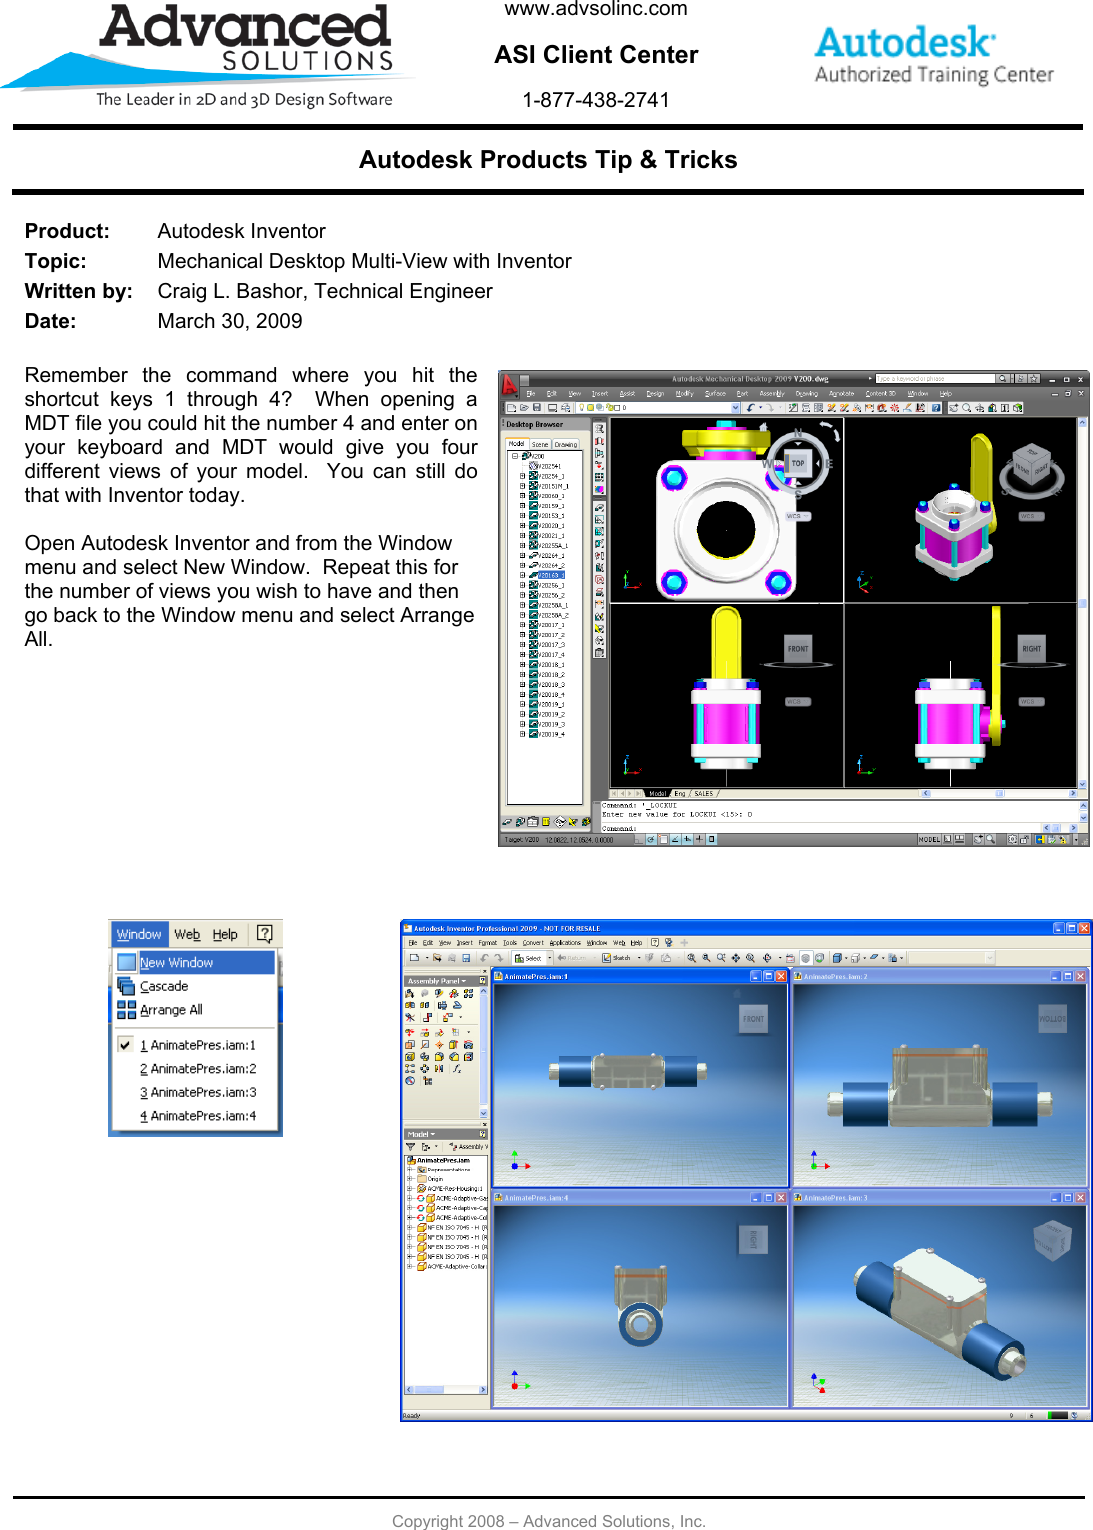 Page 1 of 1 - Mechanical Desktop Multi-View With Inventor  033009 Multi View